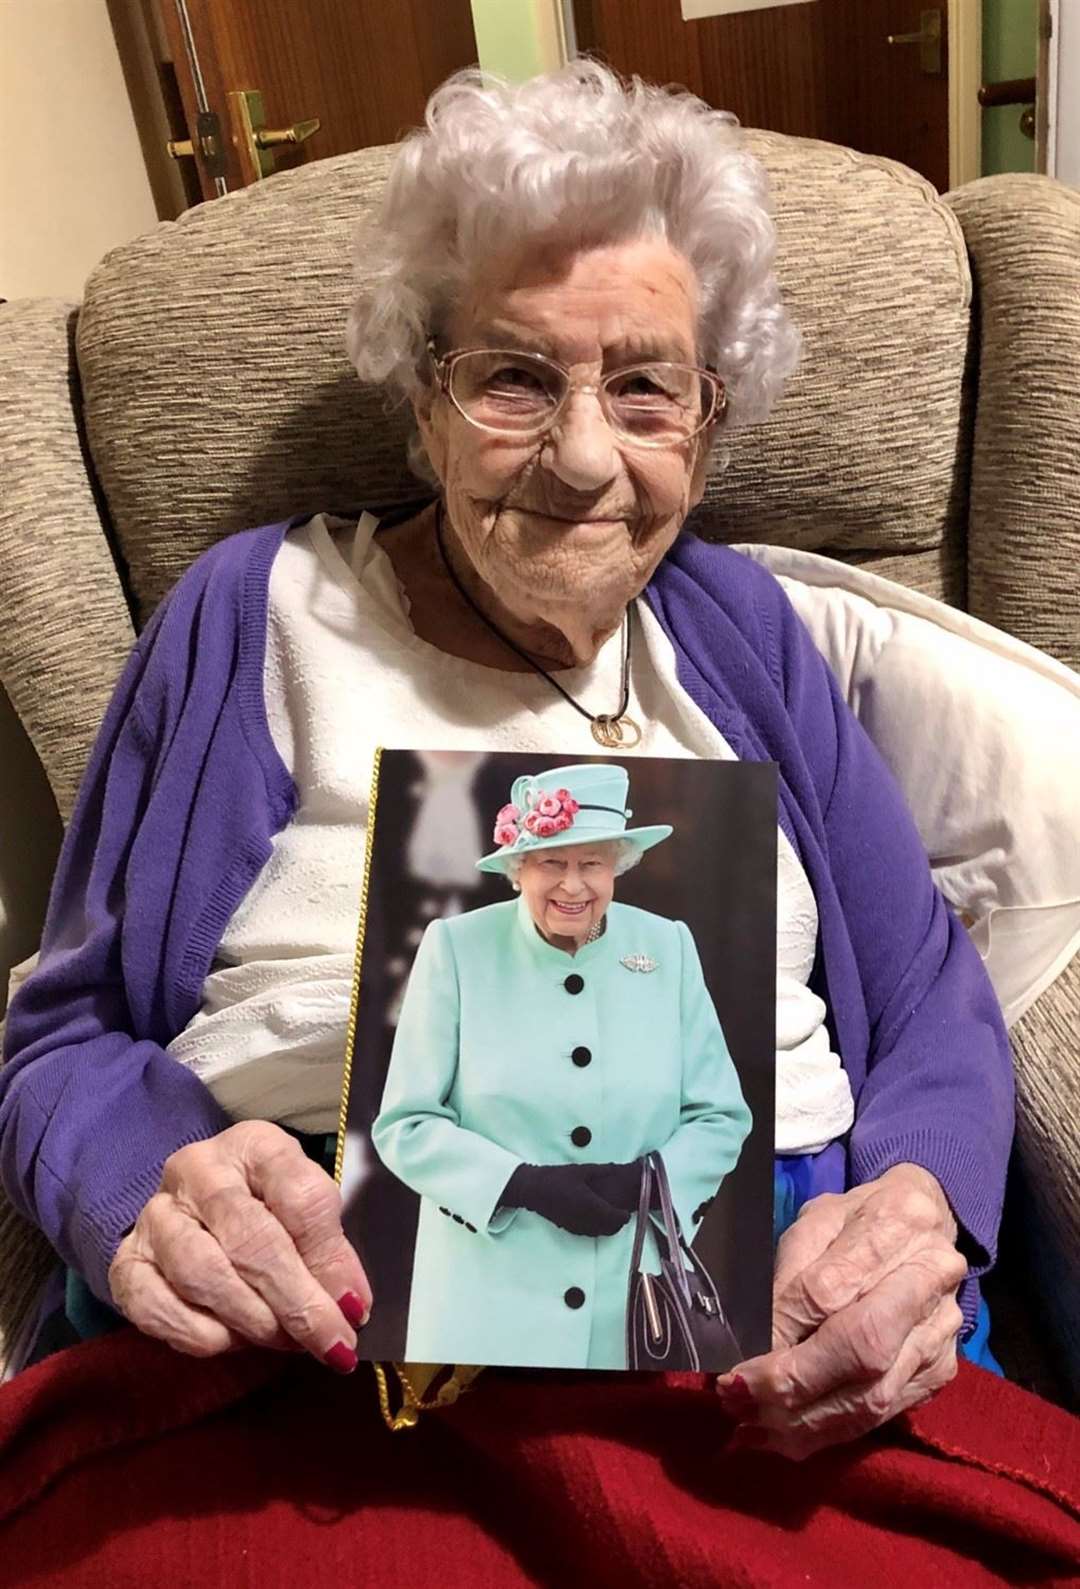 100-year-old Florence (Floss) May Cork with her card from the Queen